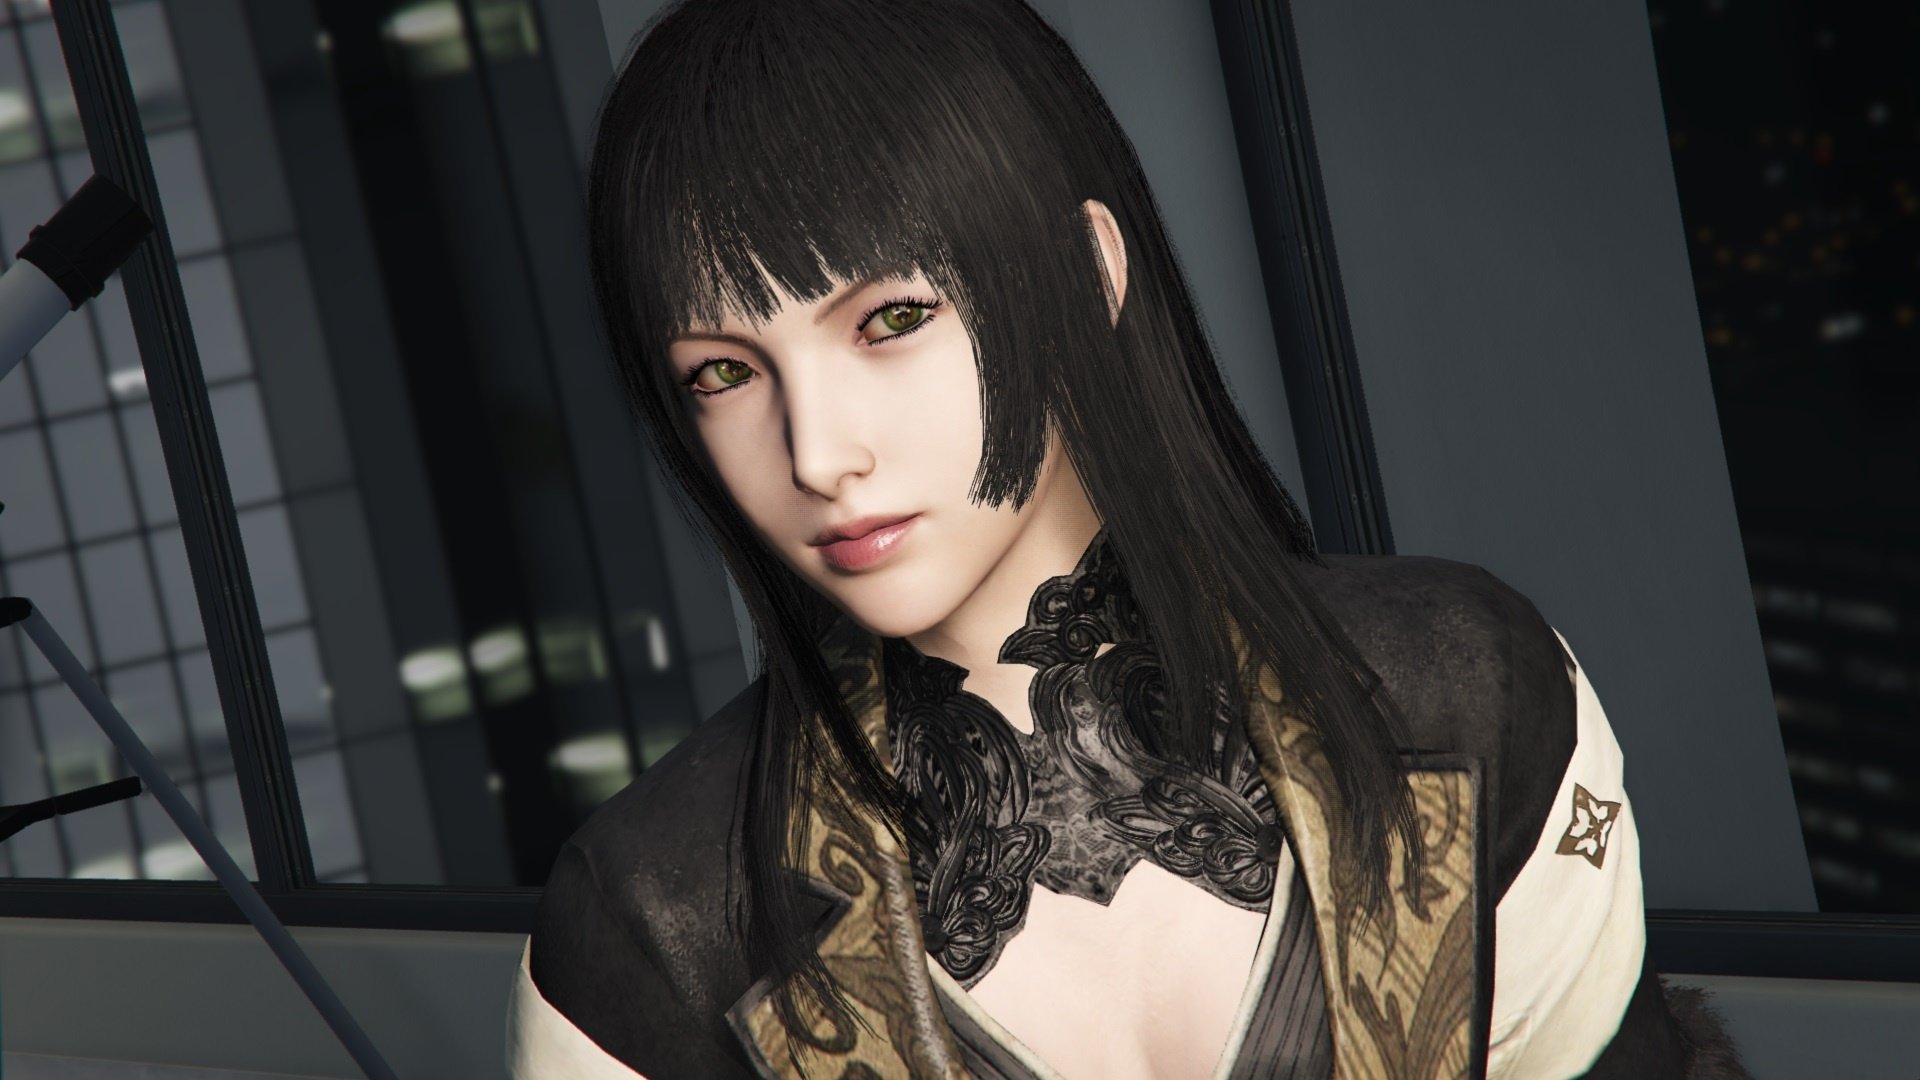 Gentiana Final Fantasy XV Add-On Ped Replace.